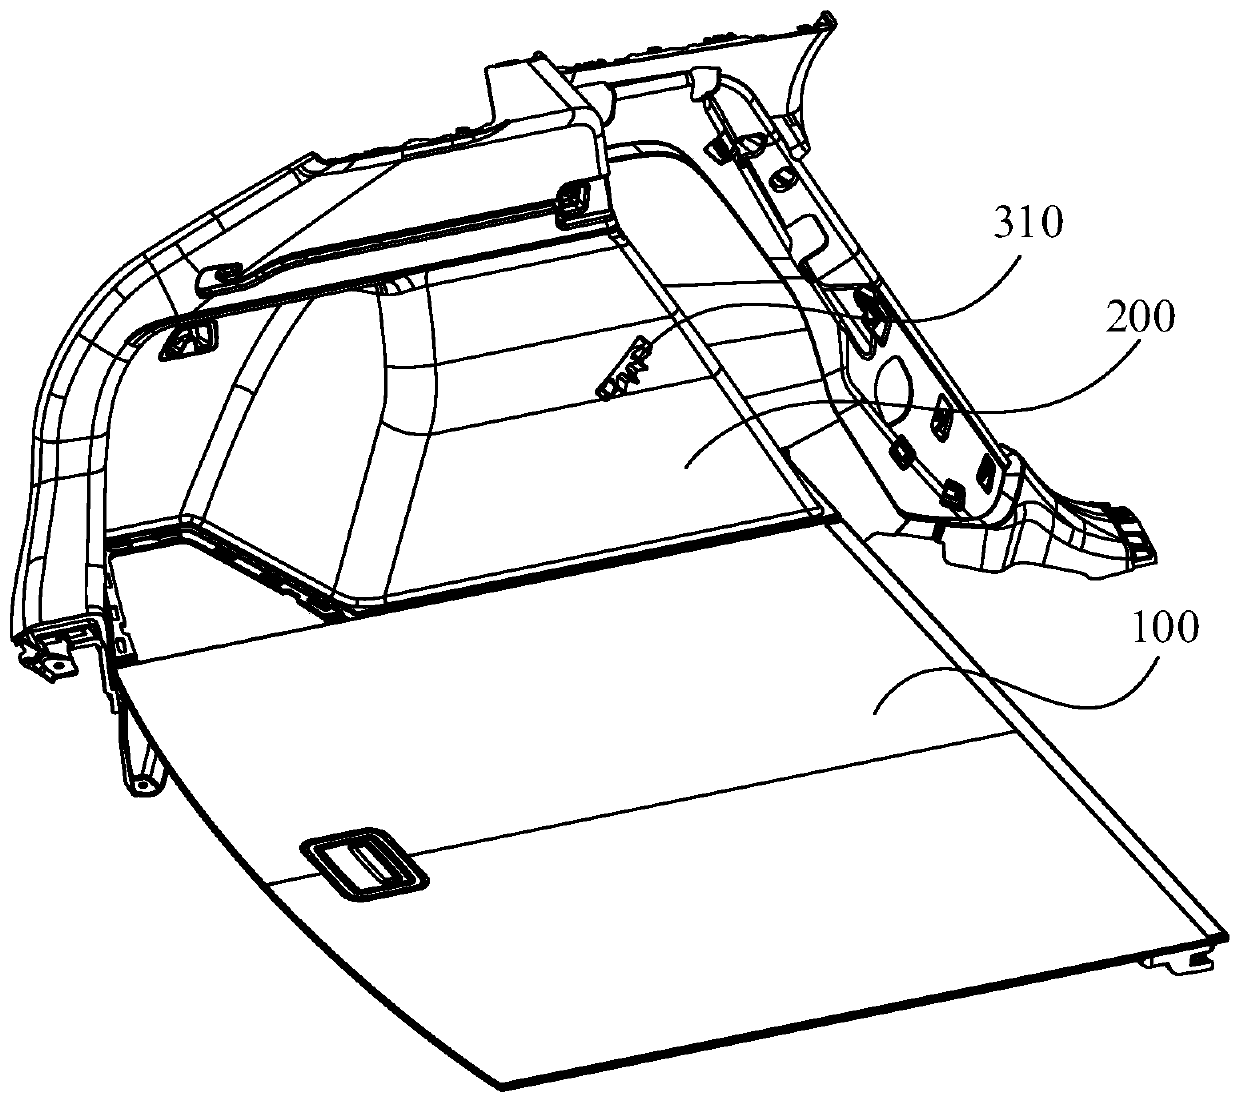 Adjusting mechanism of trunk cover plate and automobile